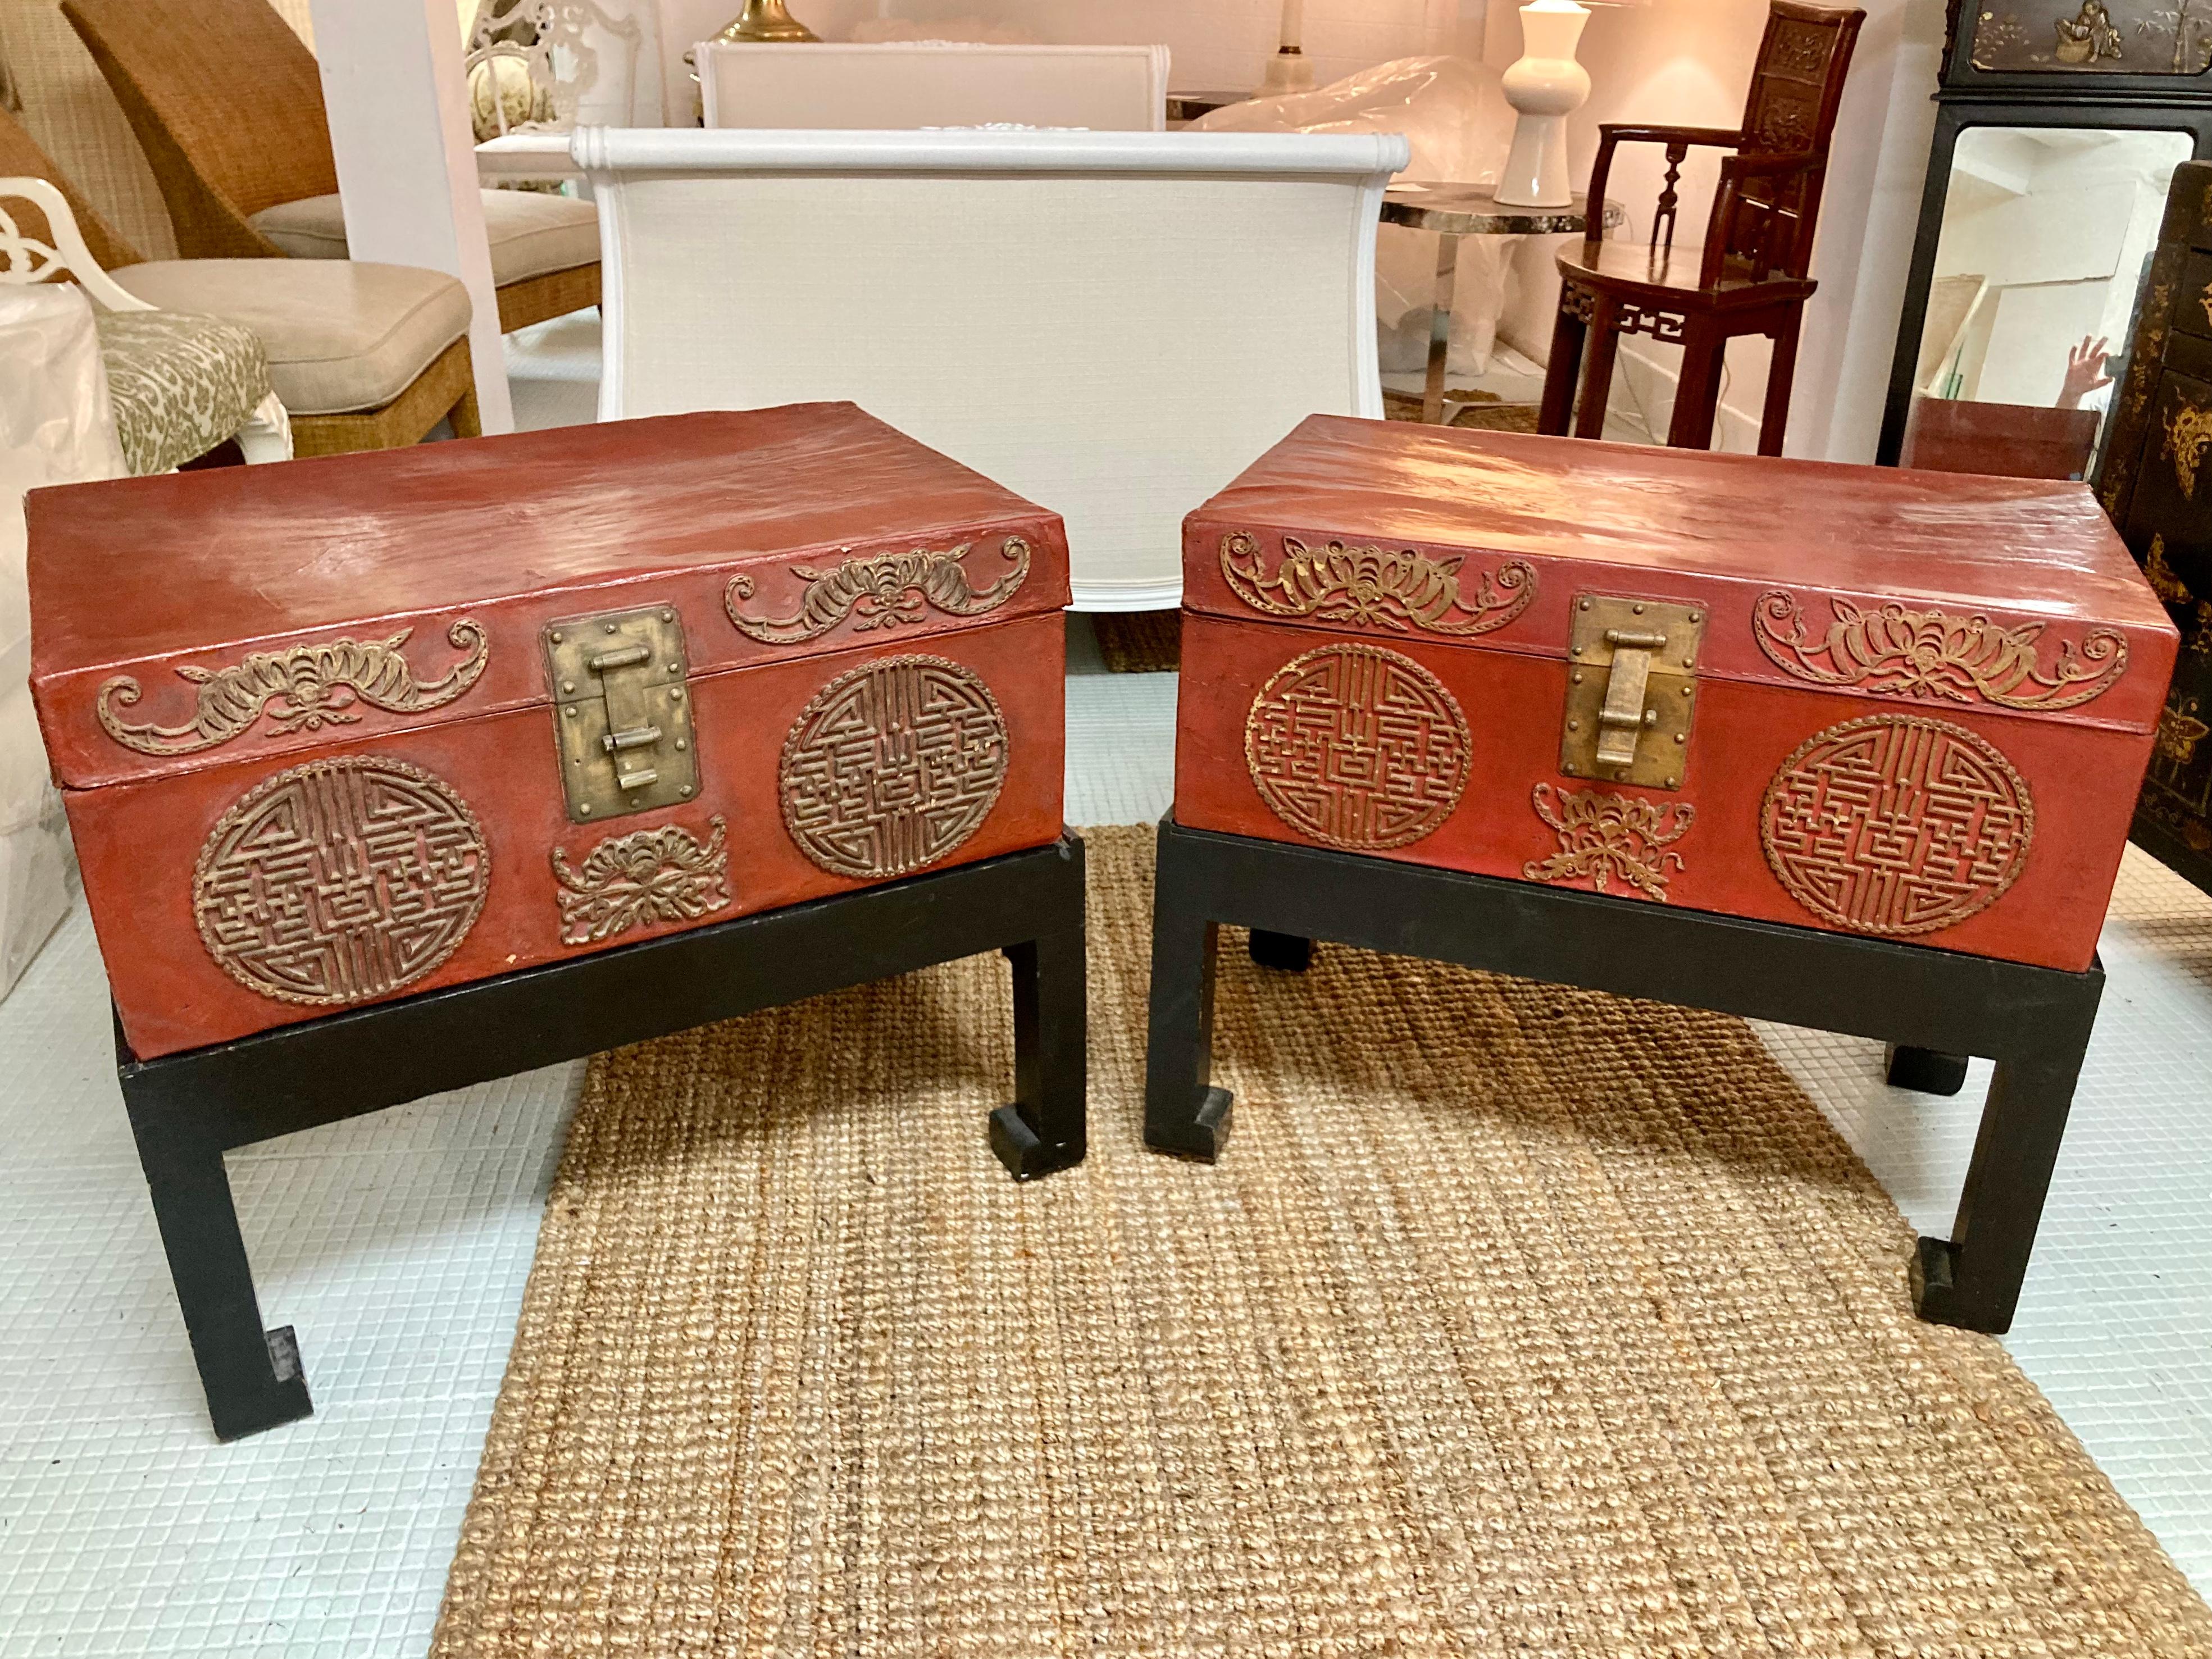 Beautiful pair of red lacquered Asian trunk side tables on black stands. Extremely decorative side tables with added bonus of great storage. Very nice artistic details on the red trunks. The bases are custom fitted to each trunk \. Add some Asian